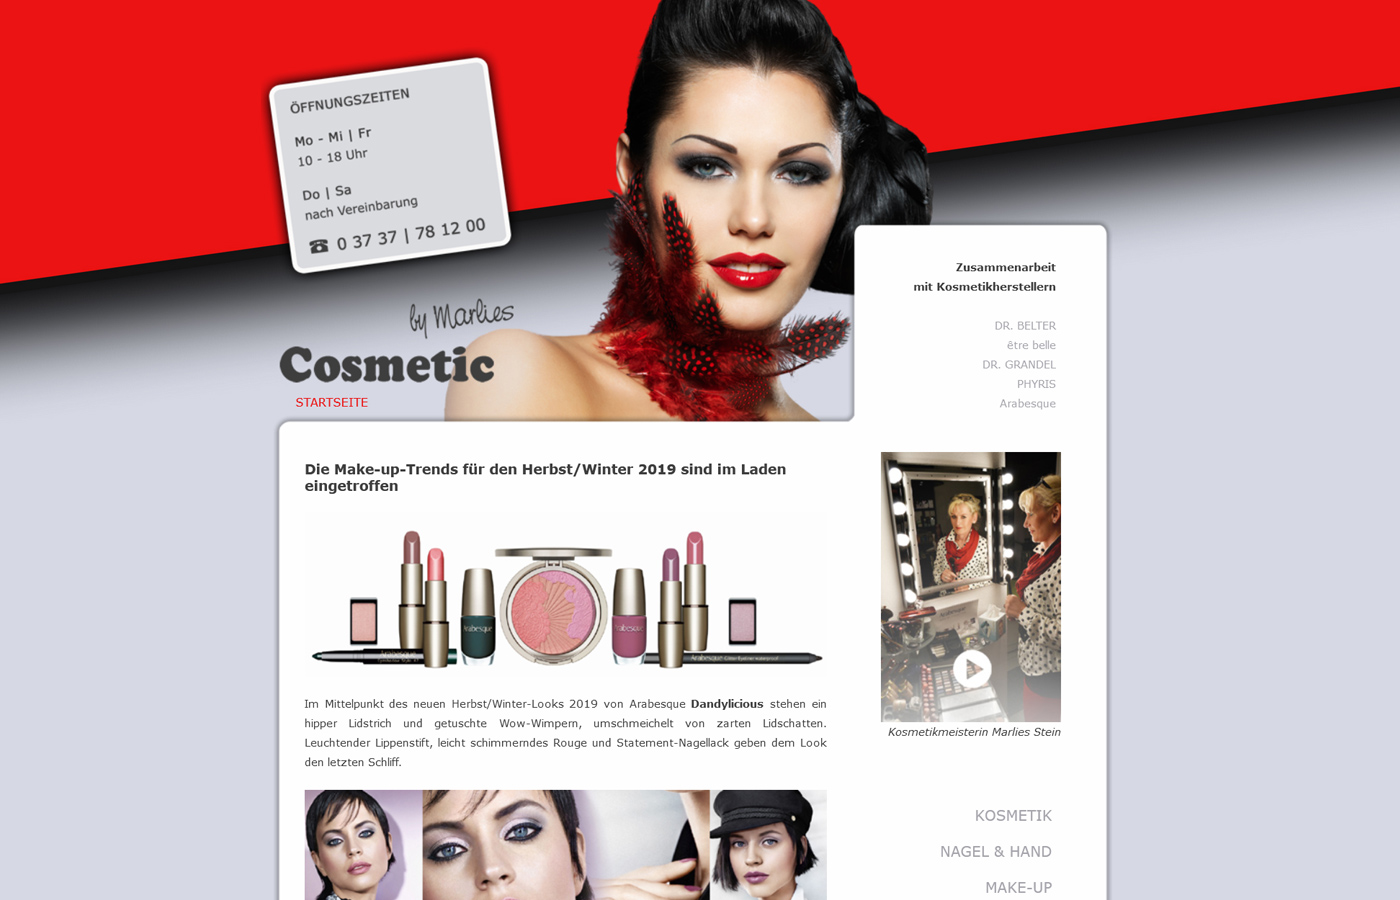 Cosmetic by Marlies